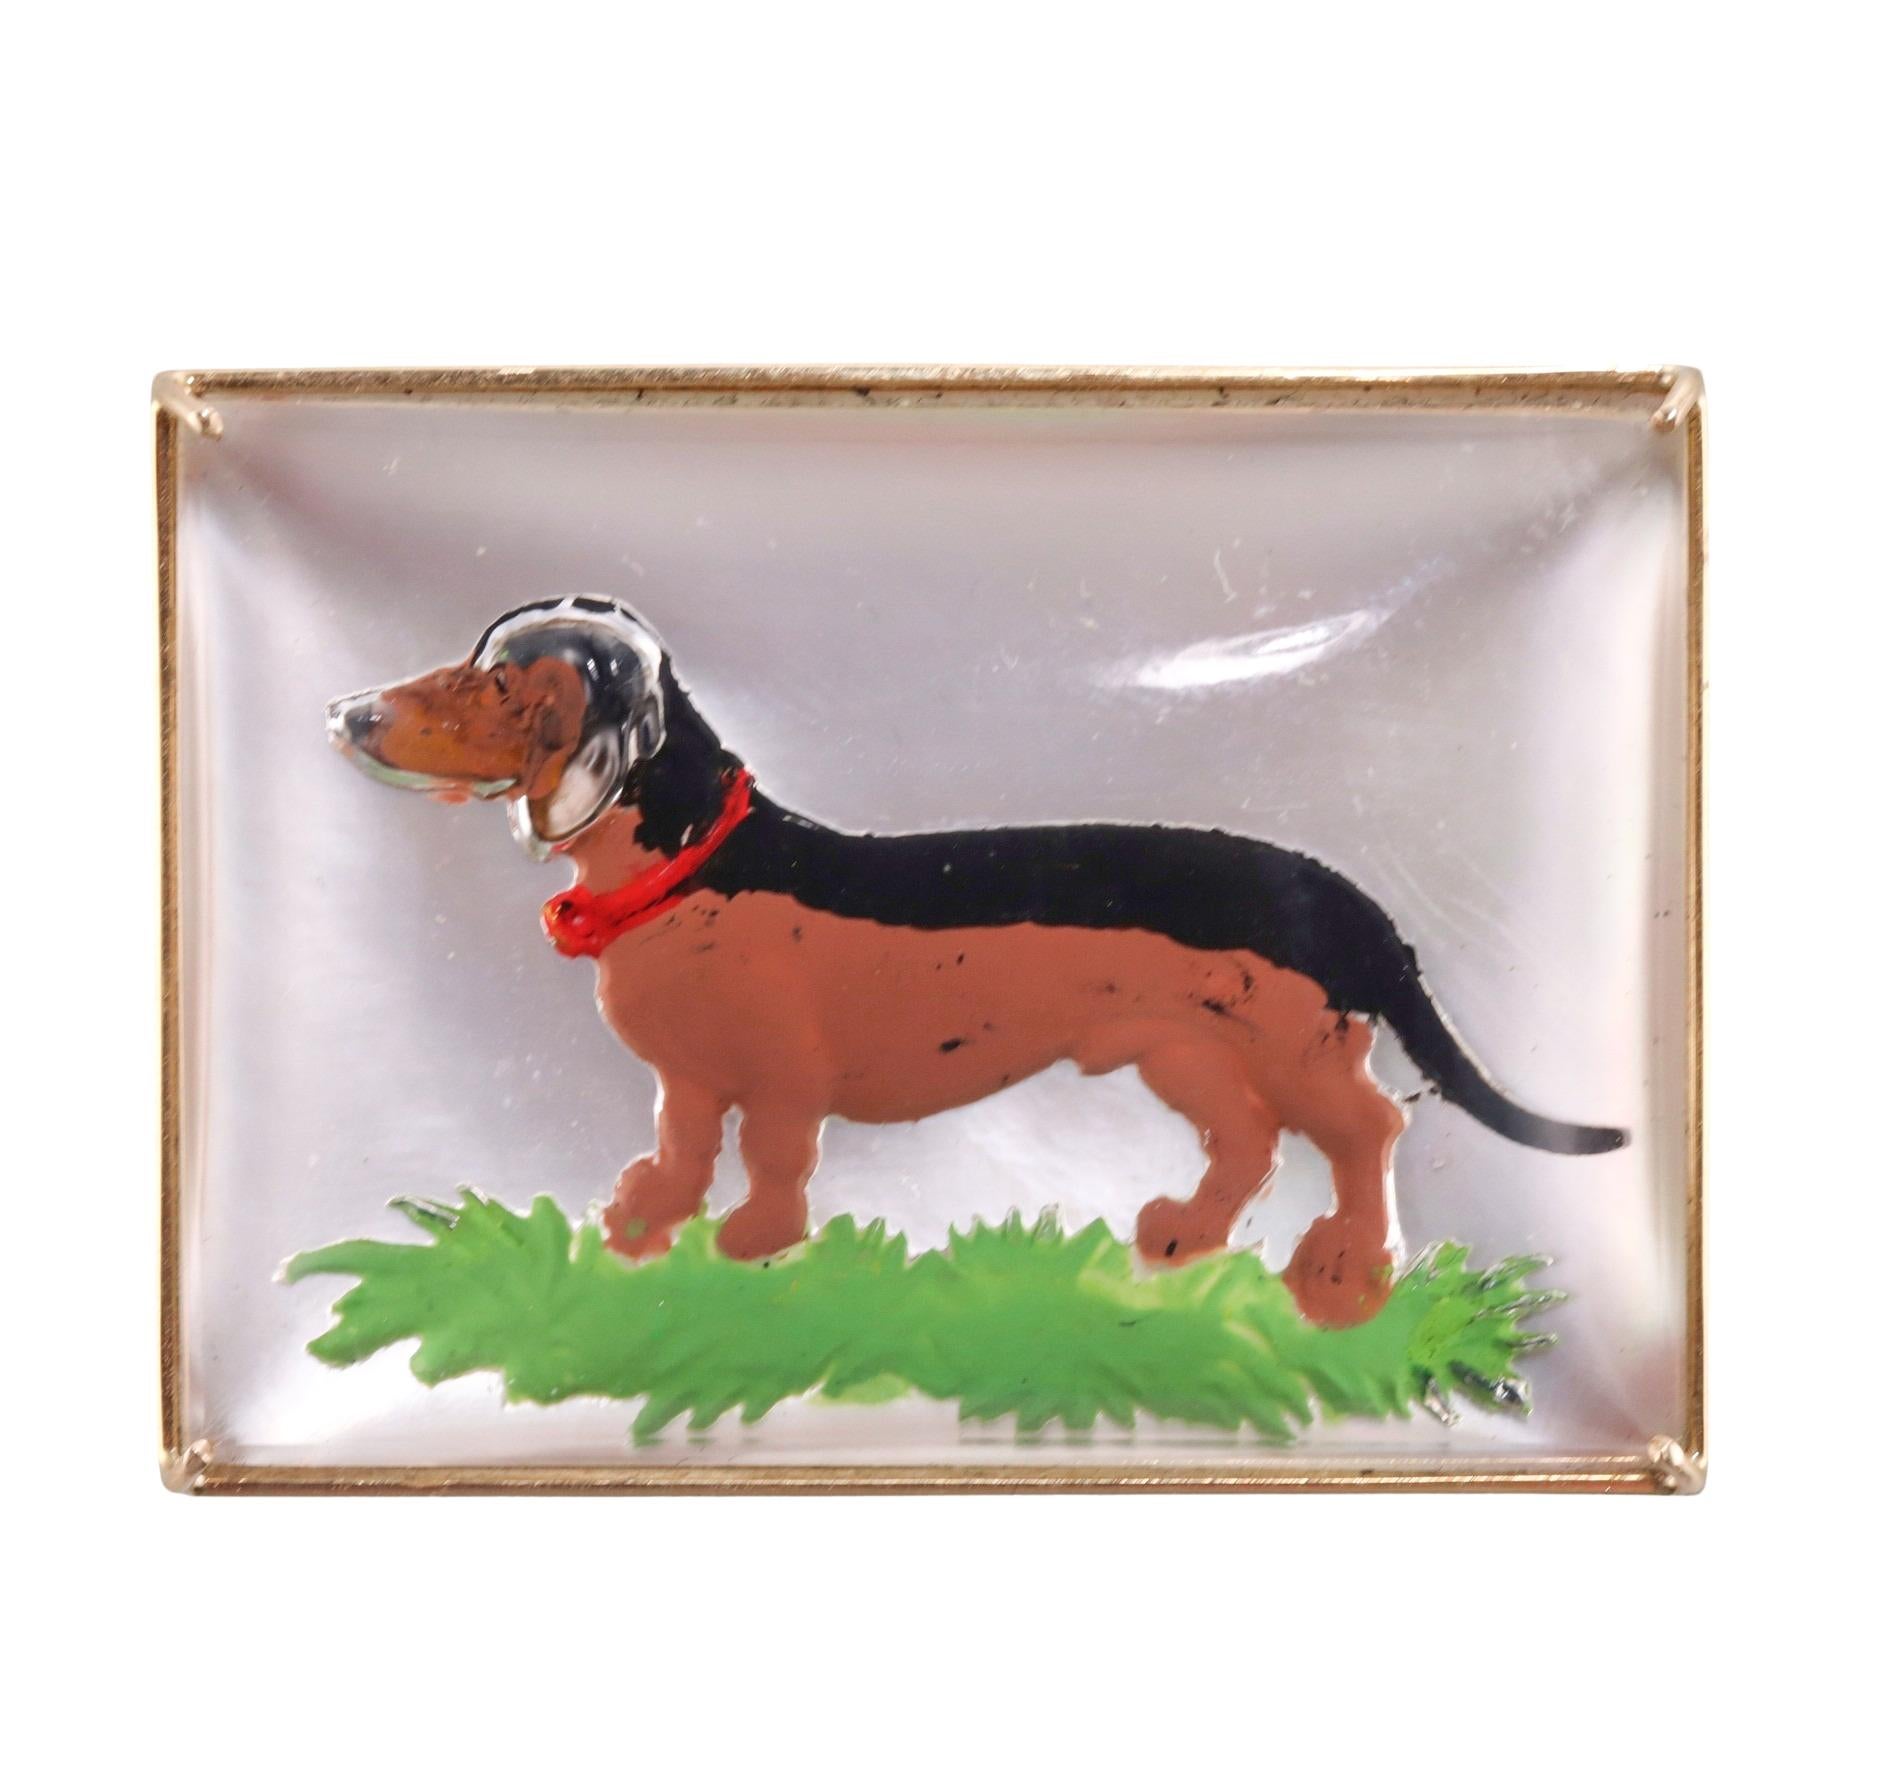 14k gold brooch, depicting a Dachshund dog, set in crystal reverse painting, backed with mother of pearl. The brooch measures 44mm x 32mm, and weighs 36.6 grams. Tested 14k, not hallmarked.